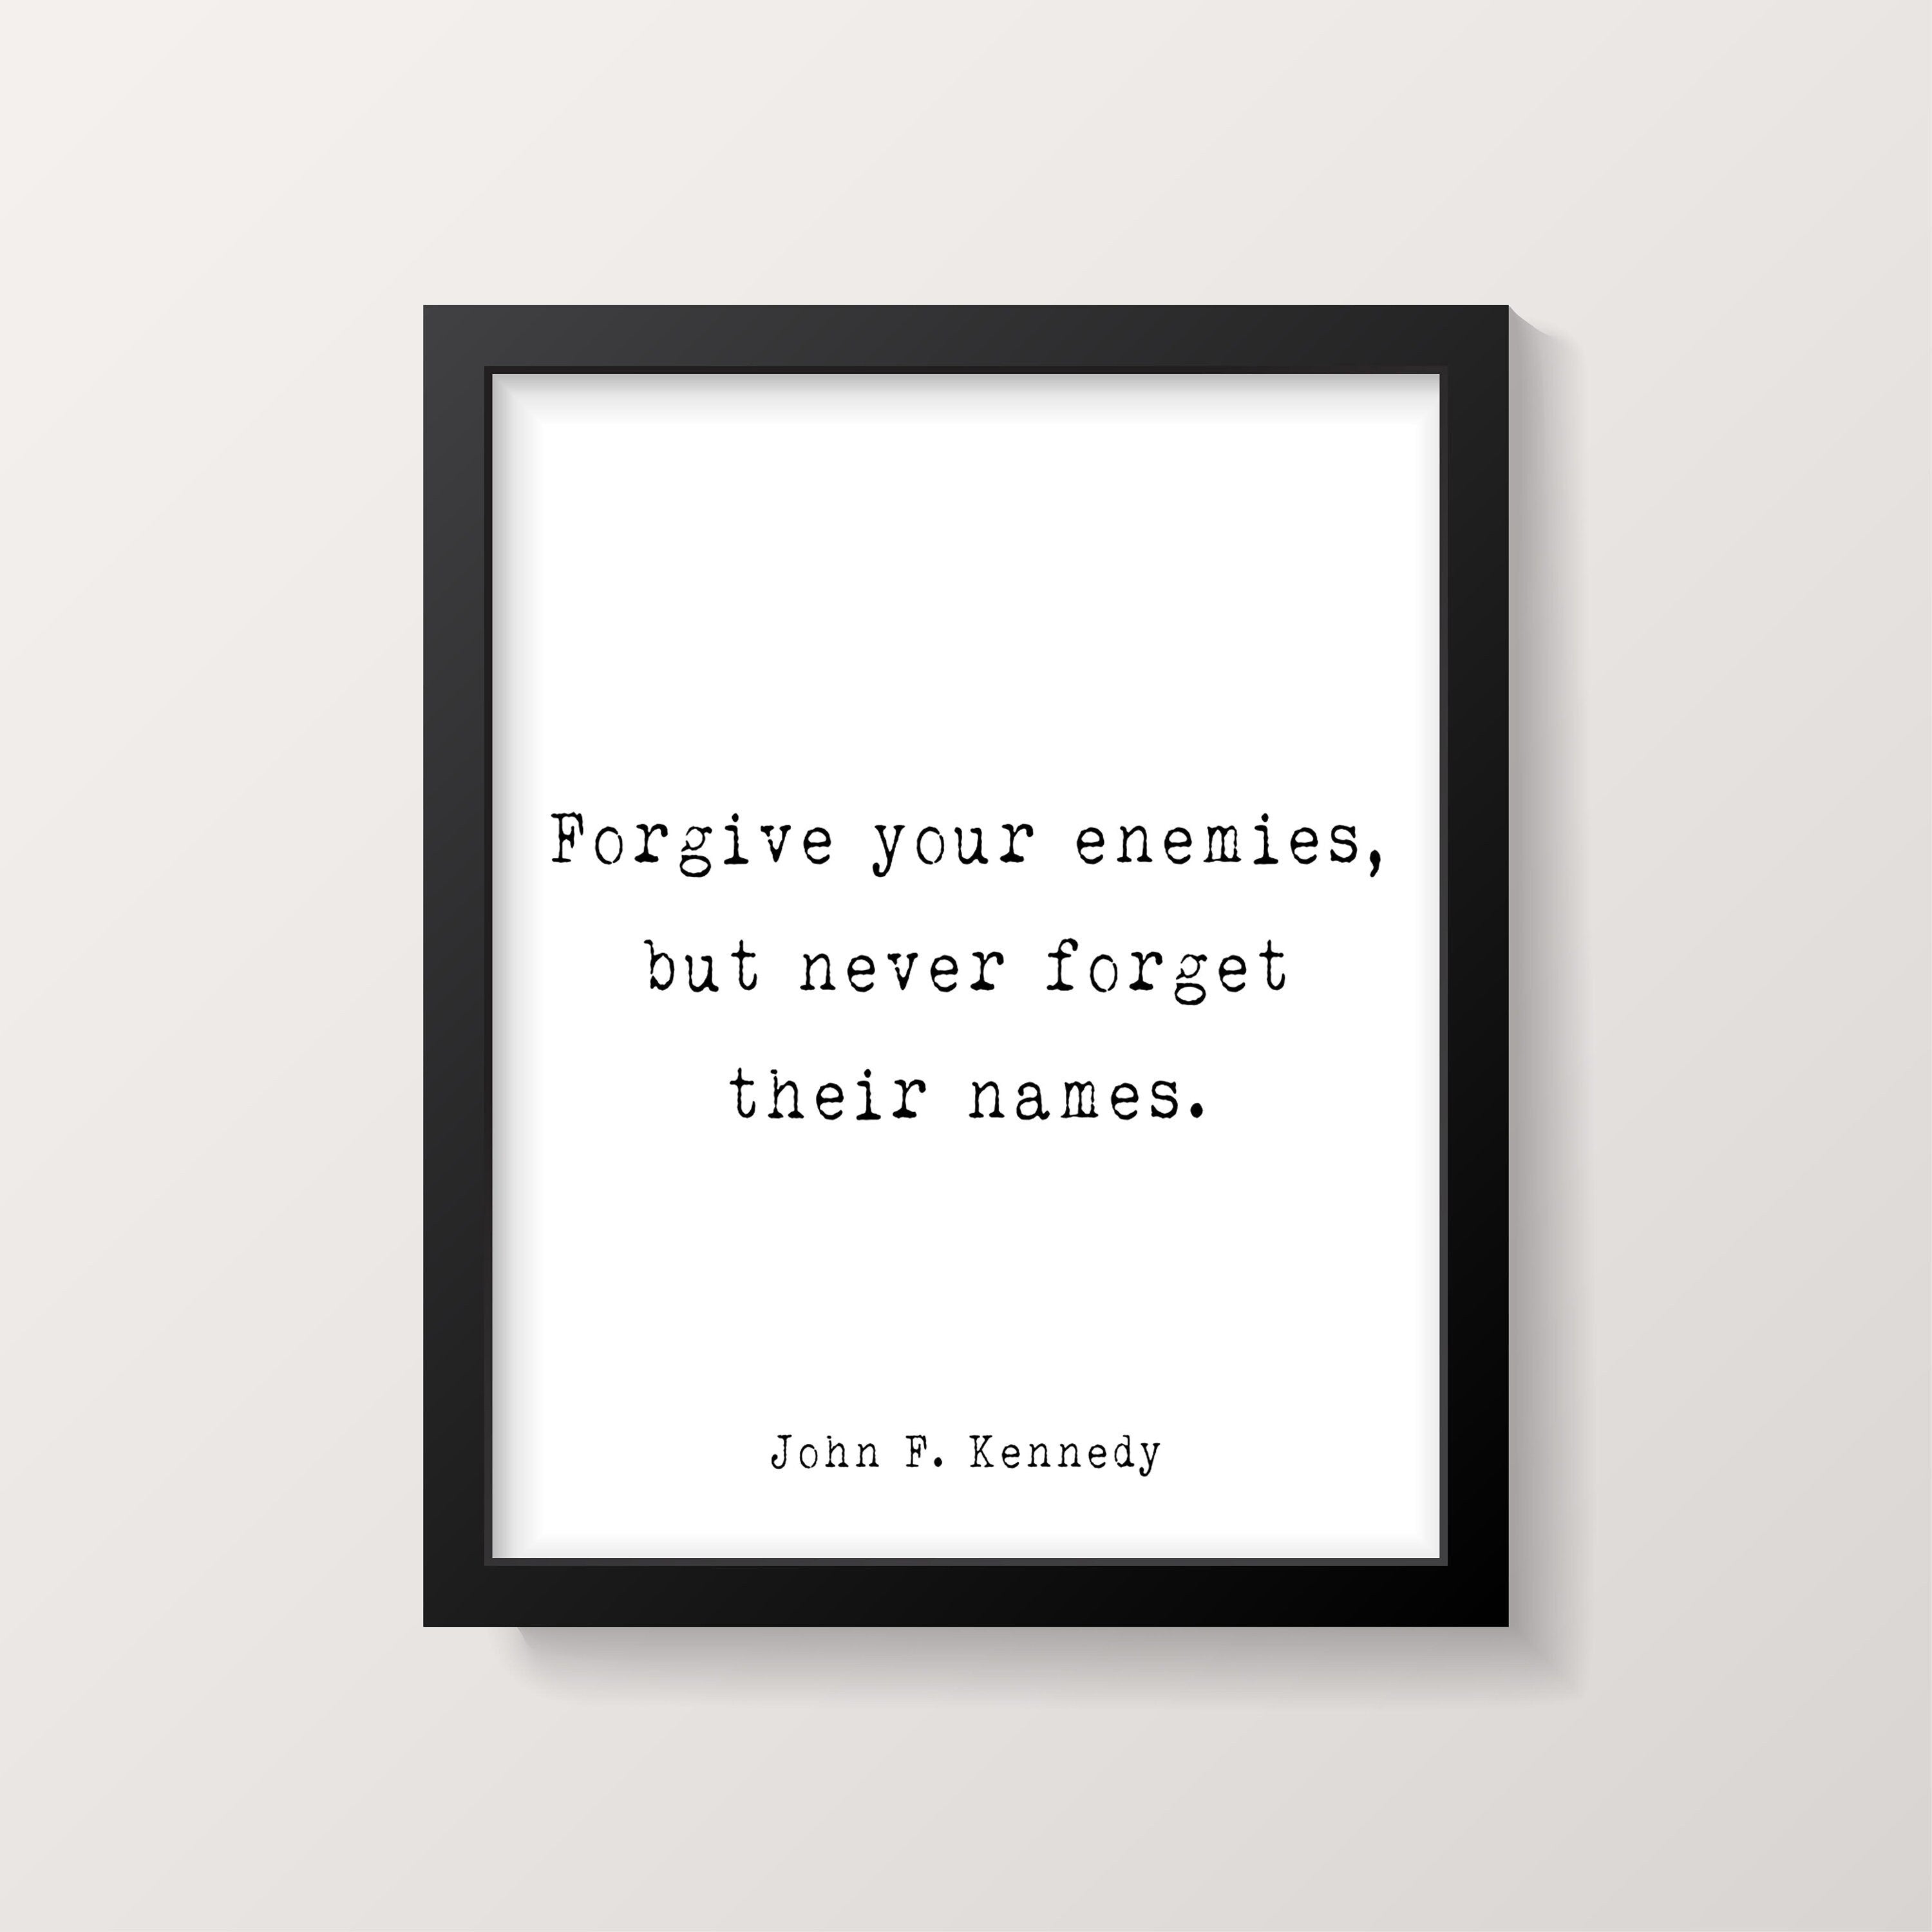 John F. Kennedy Presidential Quote Print, Forgive Your Enemies